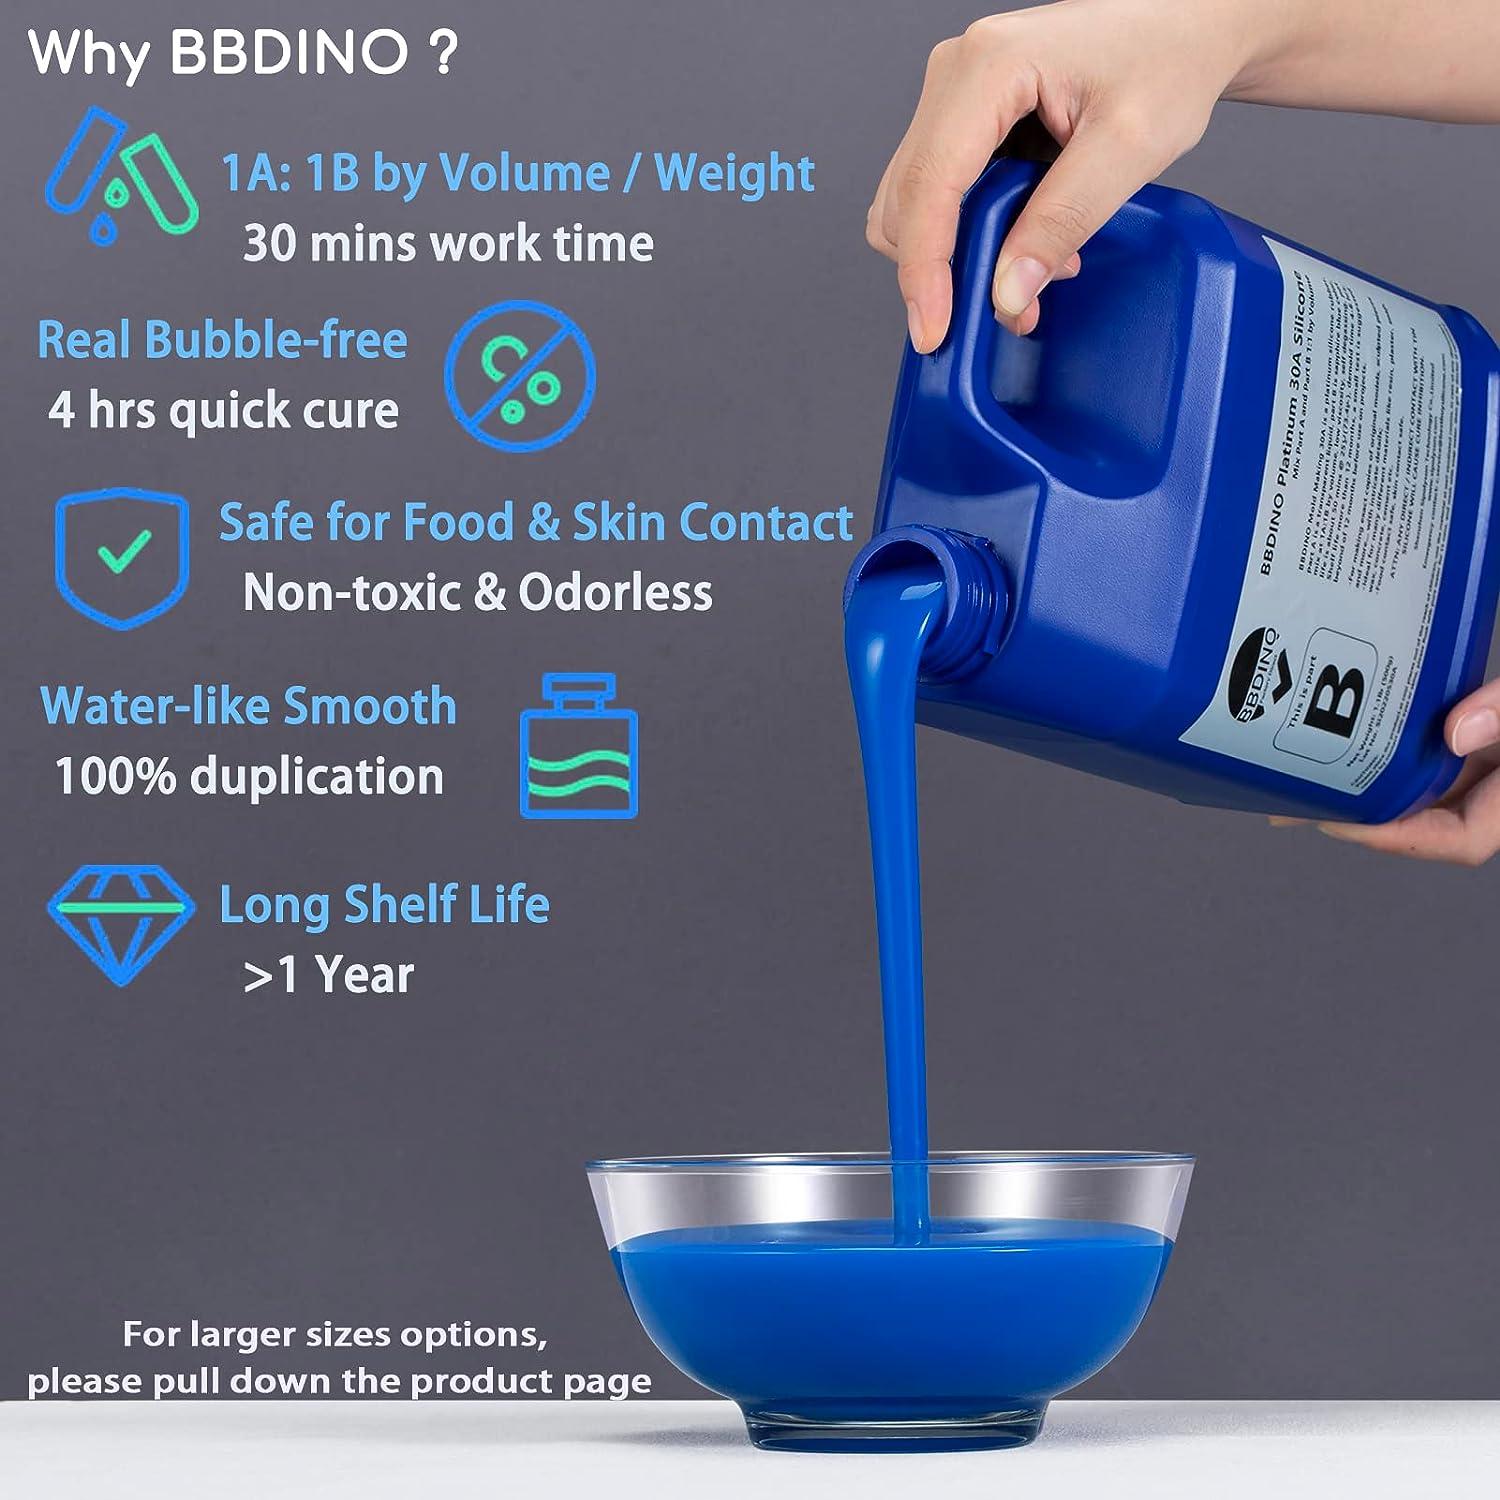 Nicpro Silicone Mold Making Kit 30A, 5Lbs (80 Oz) Sapphire Blue 3D Sil –  Loomini